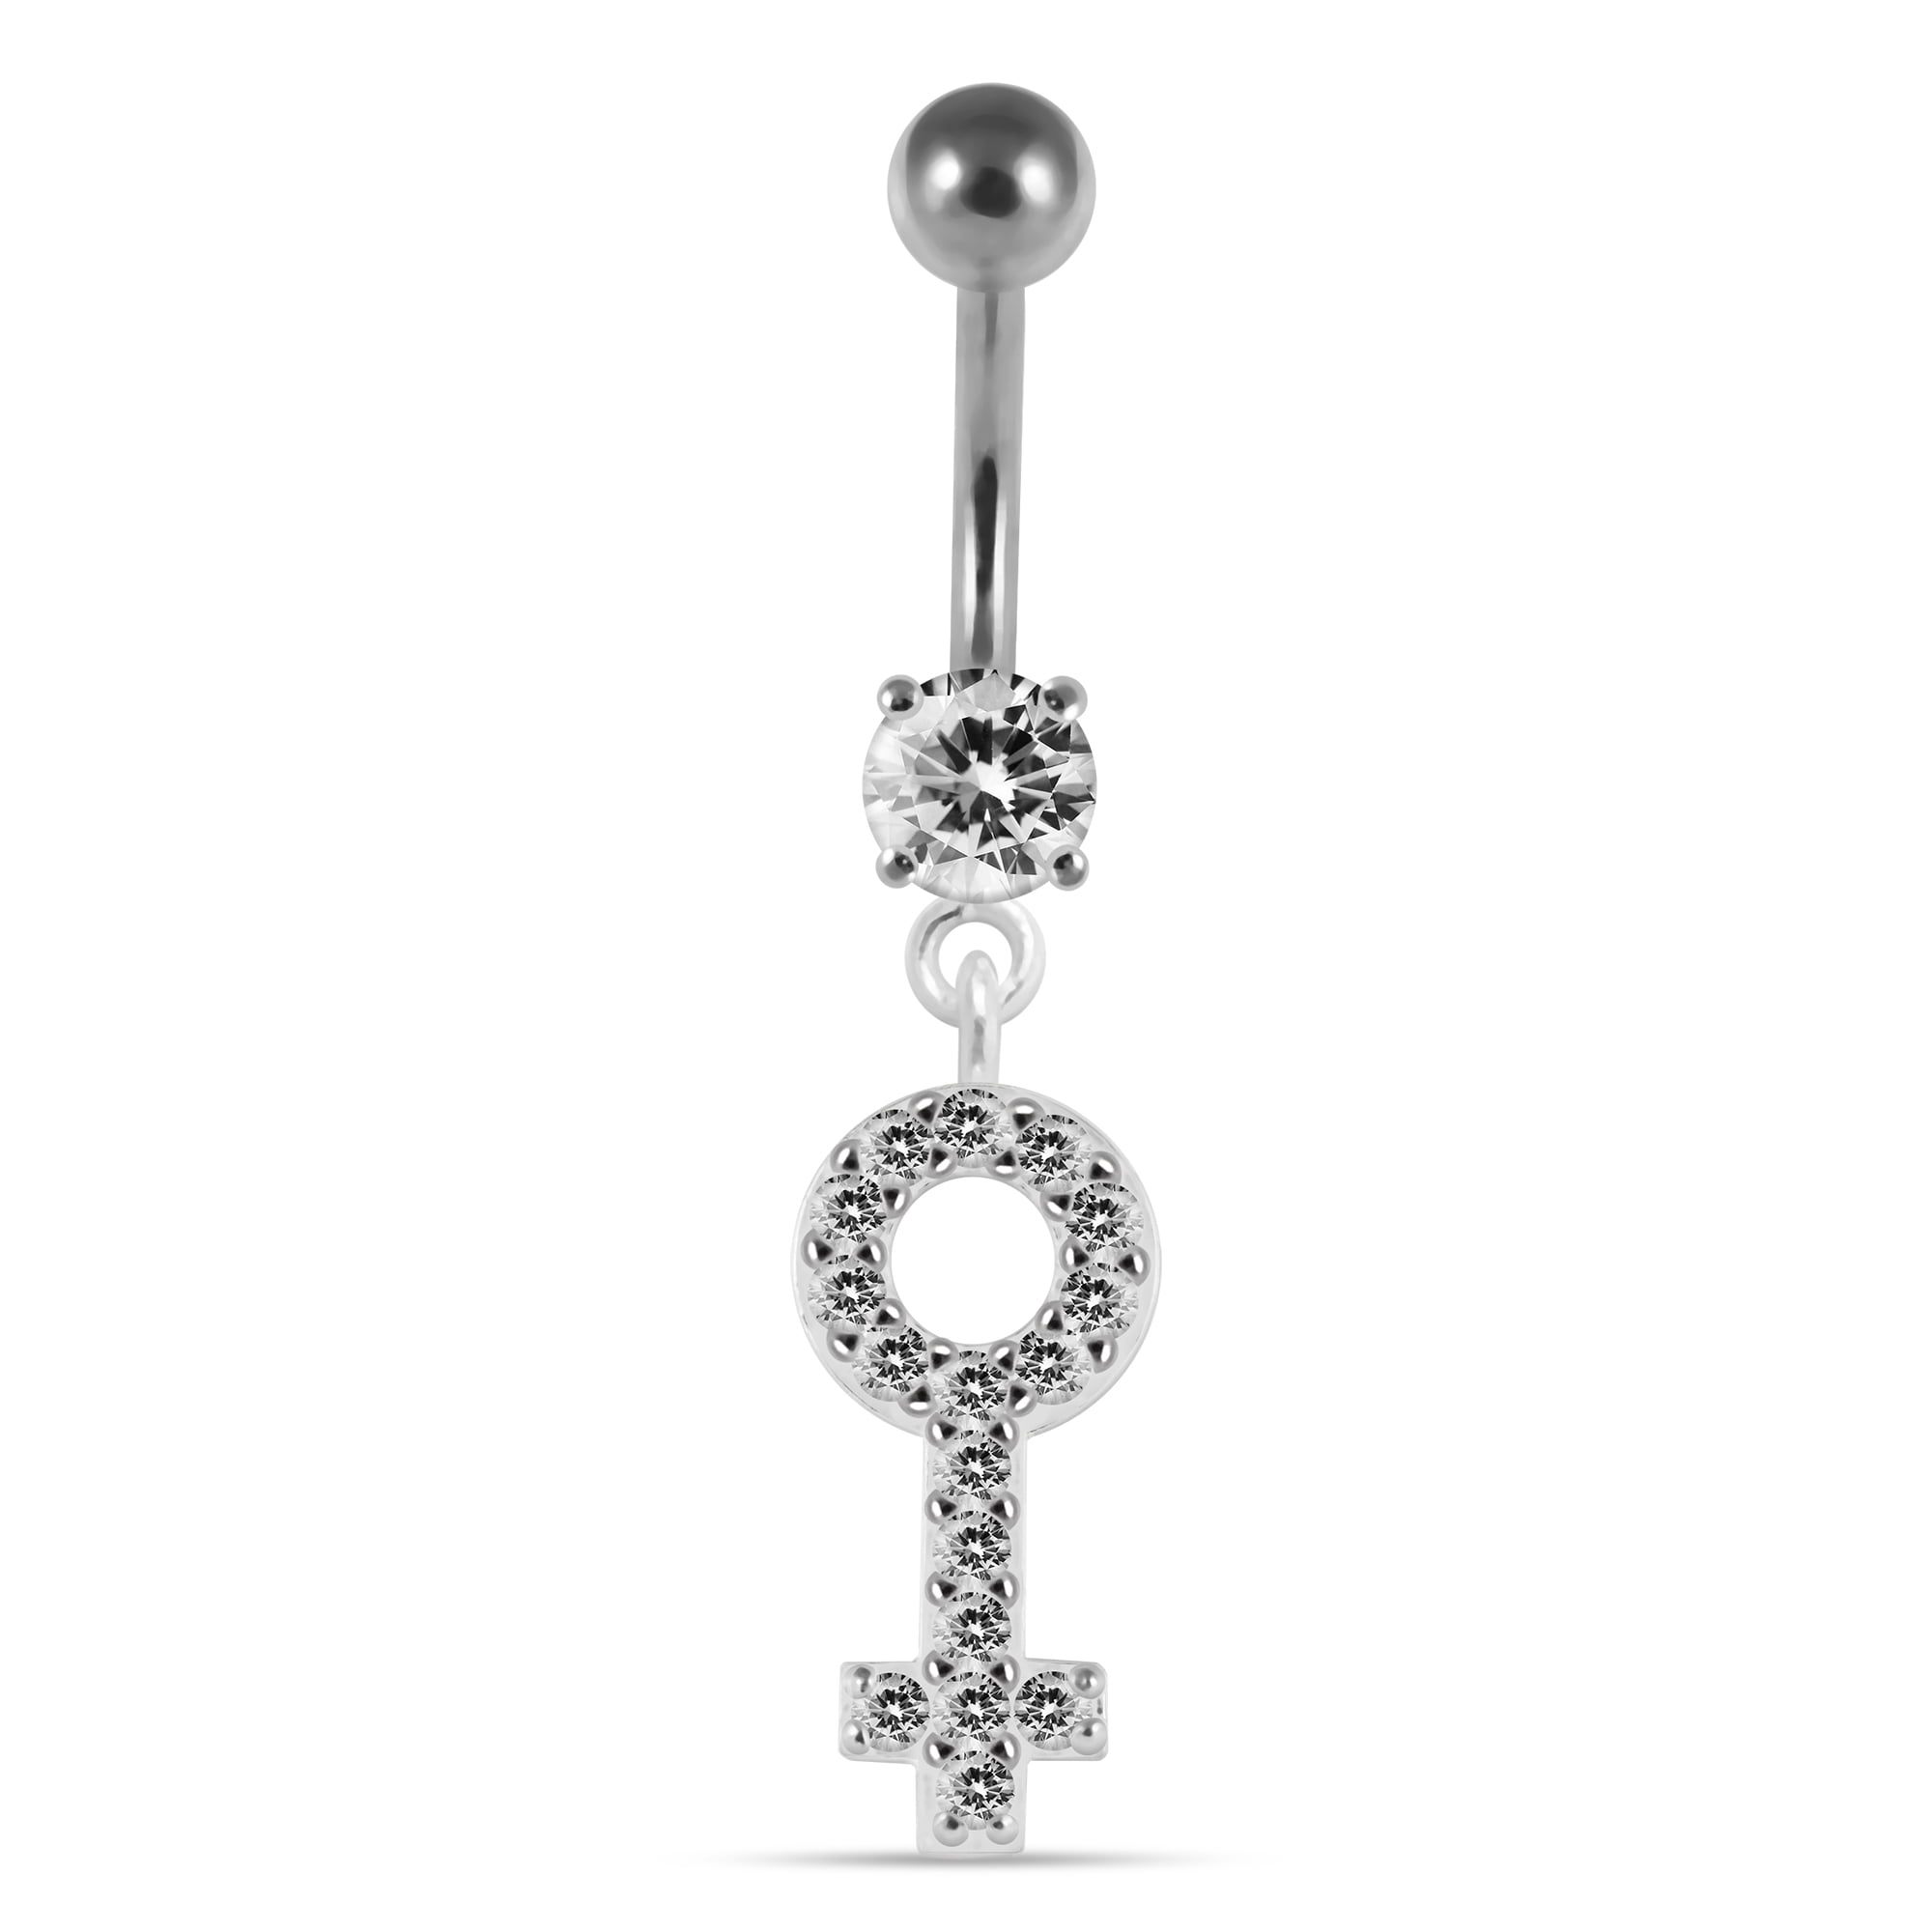 Multi Crystal Gemstone Peace Sign Dangling 925 Sterling Silver Belly Ring Body Jewelry